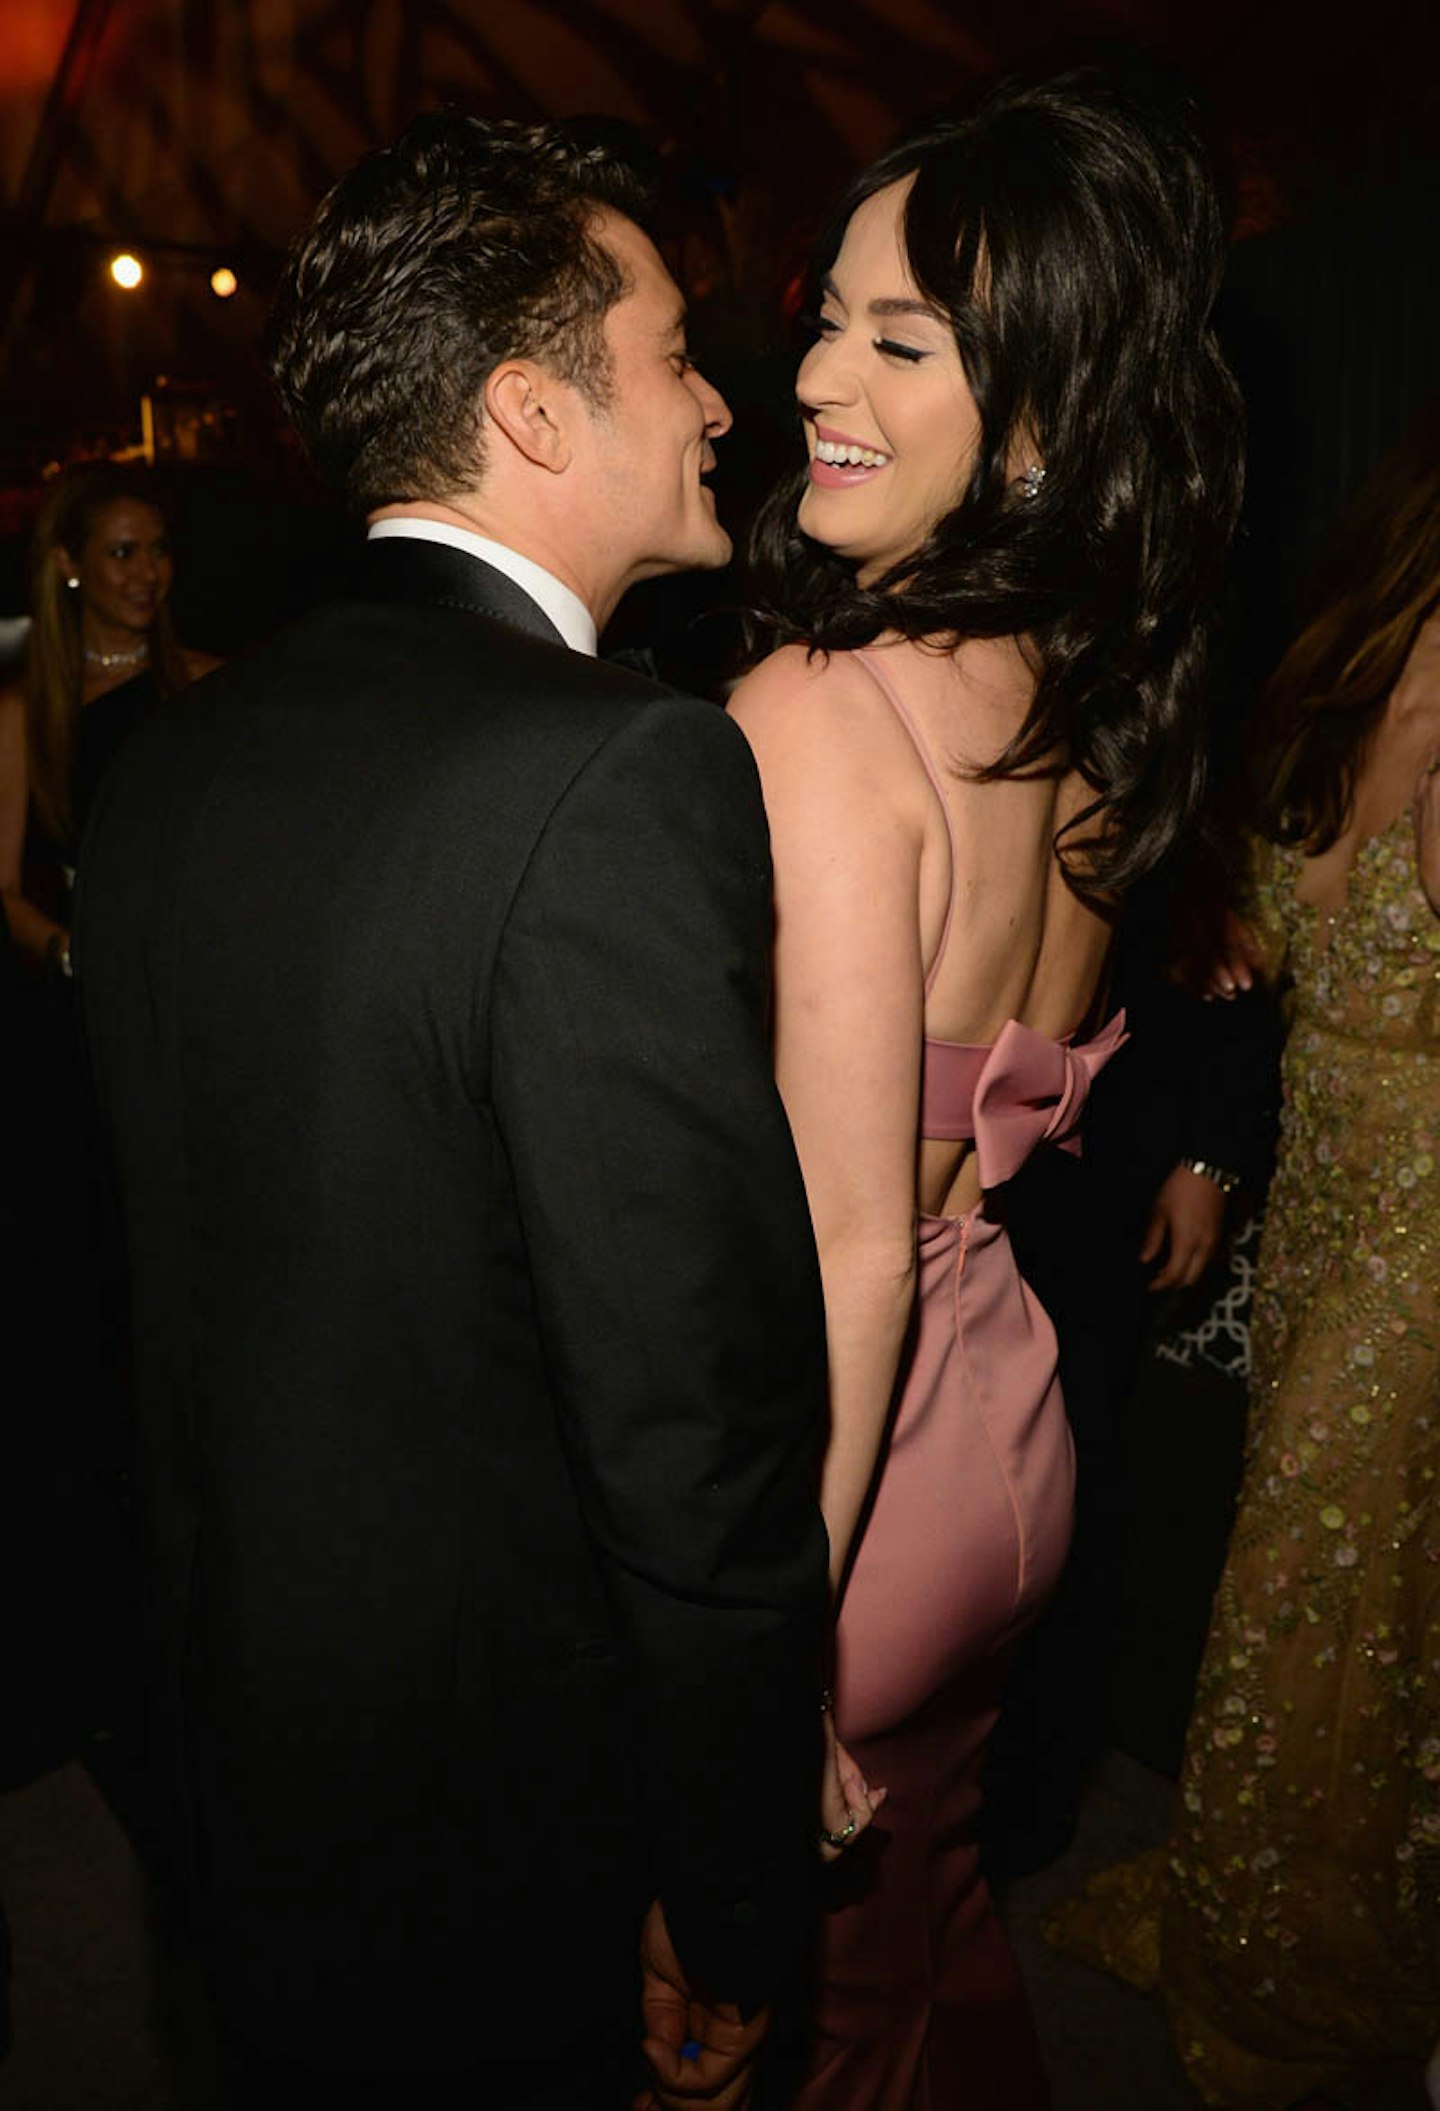 5) Katy Perry's relationship with Orlando Bloom